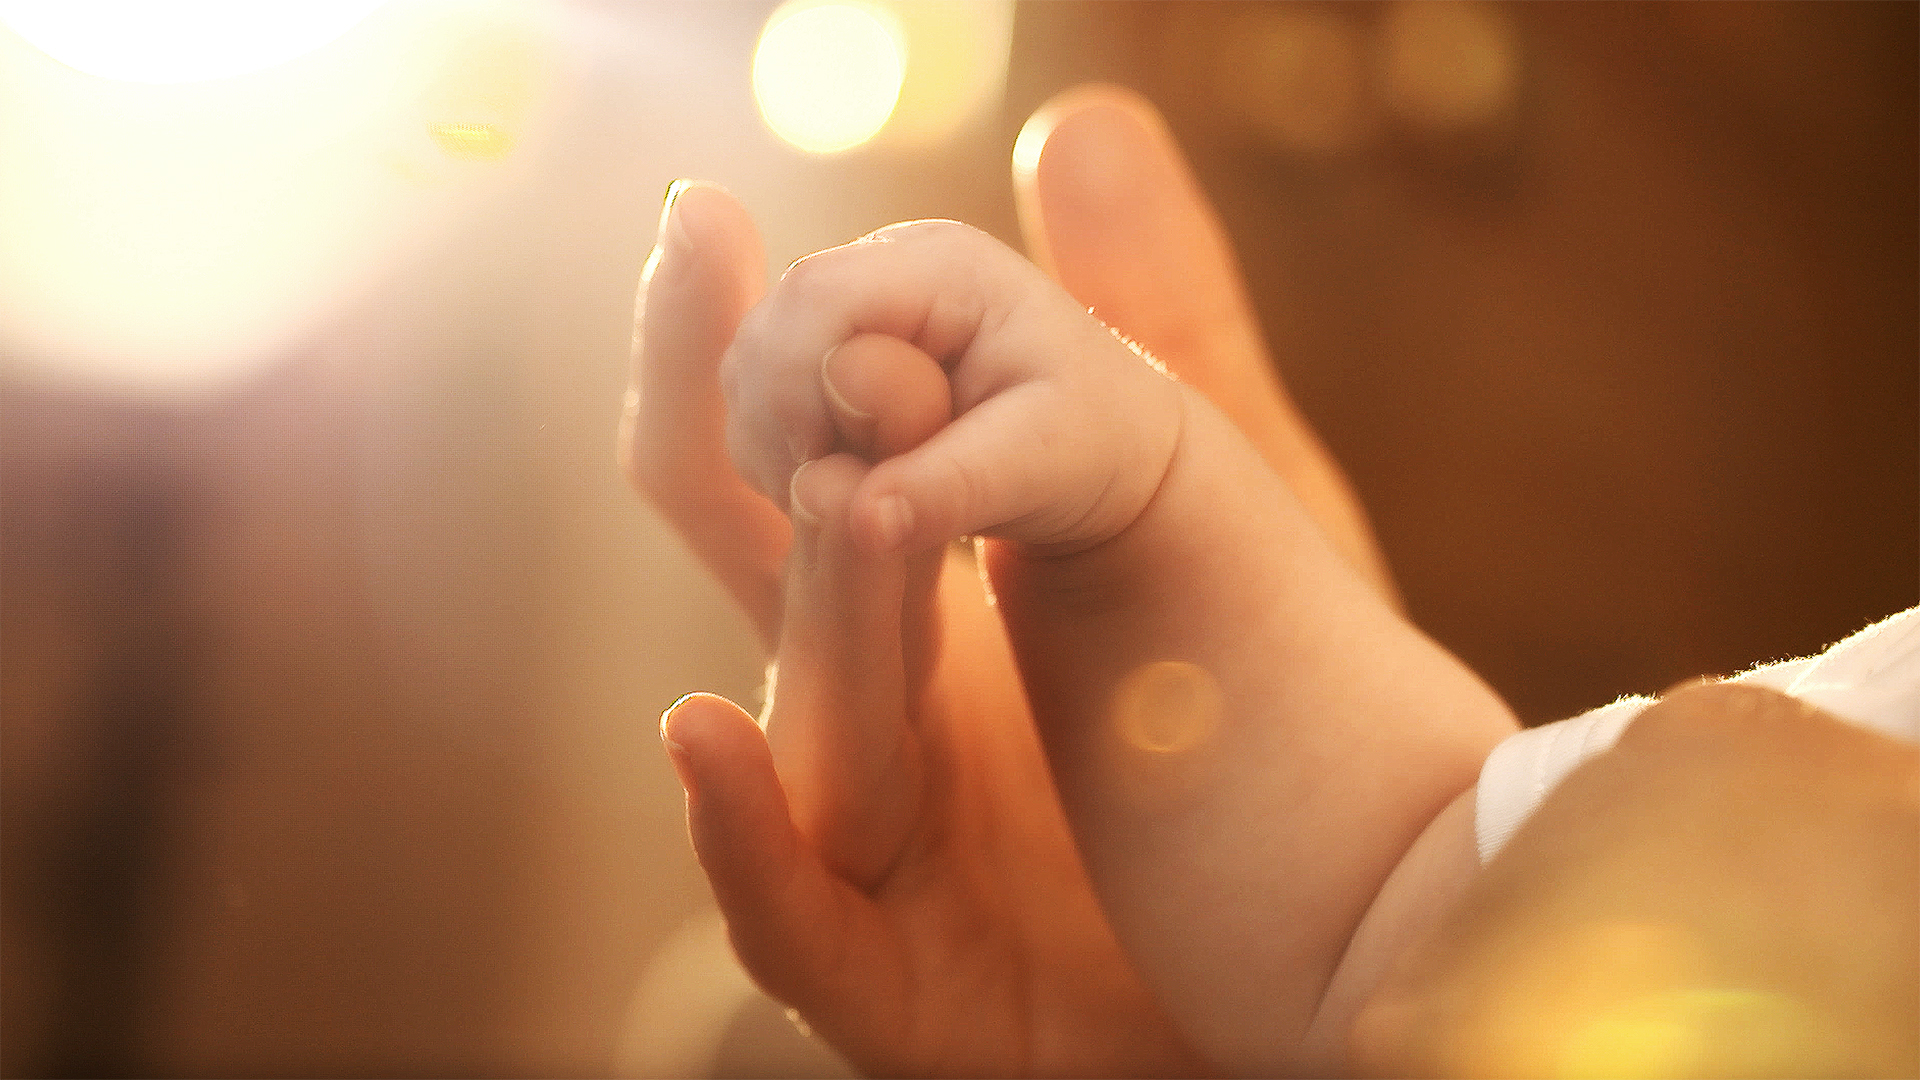 A babies tiny fist gasps a parents finger. It's a metaphor for being awed.